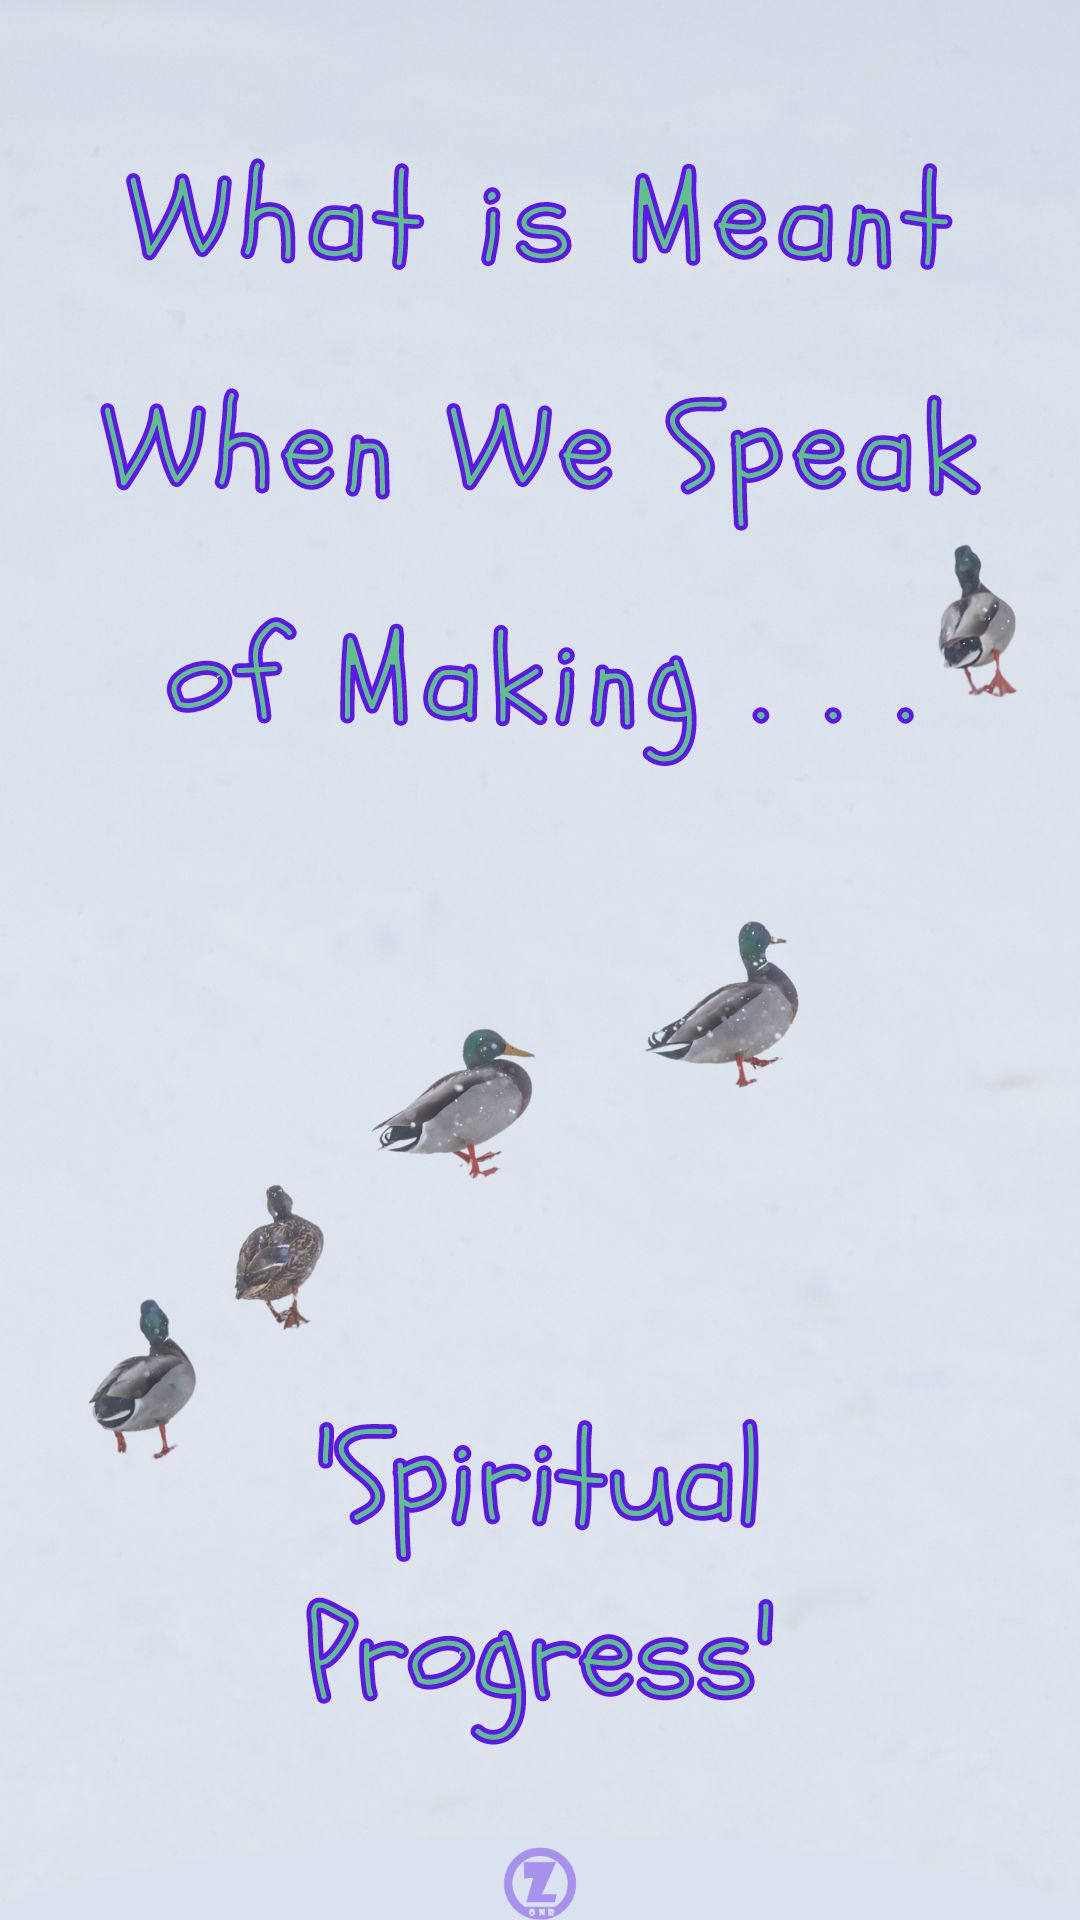 You are currently viewing What is Meant When We Speak of Making ‘Spiritual Progress’ – Step 2